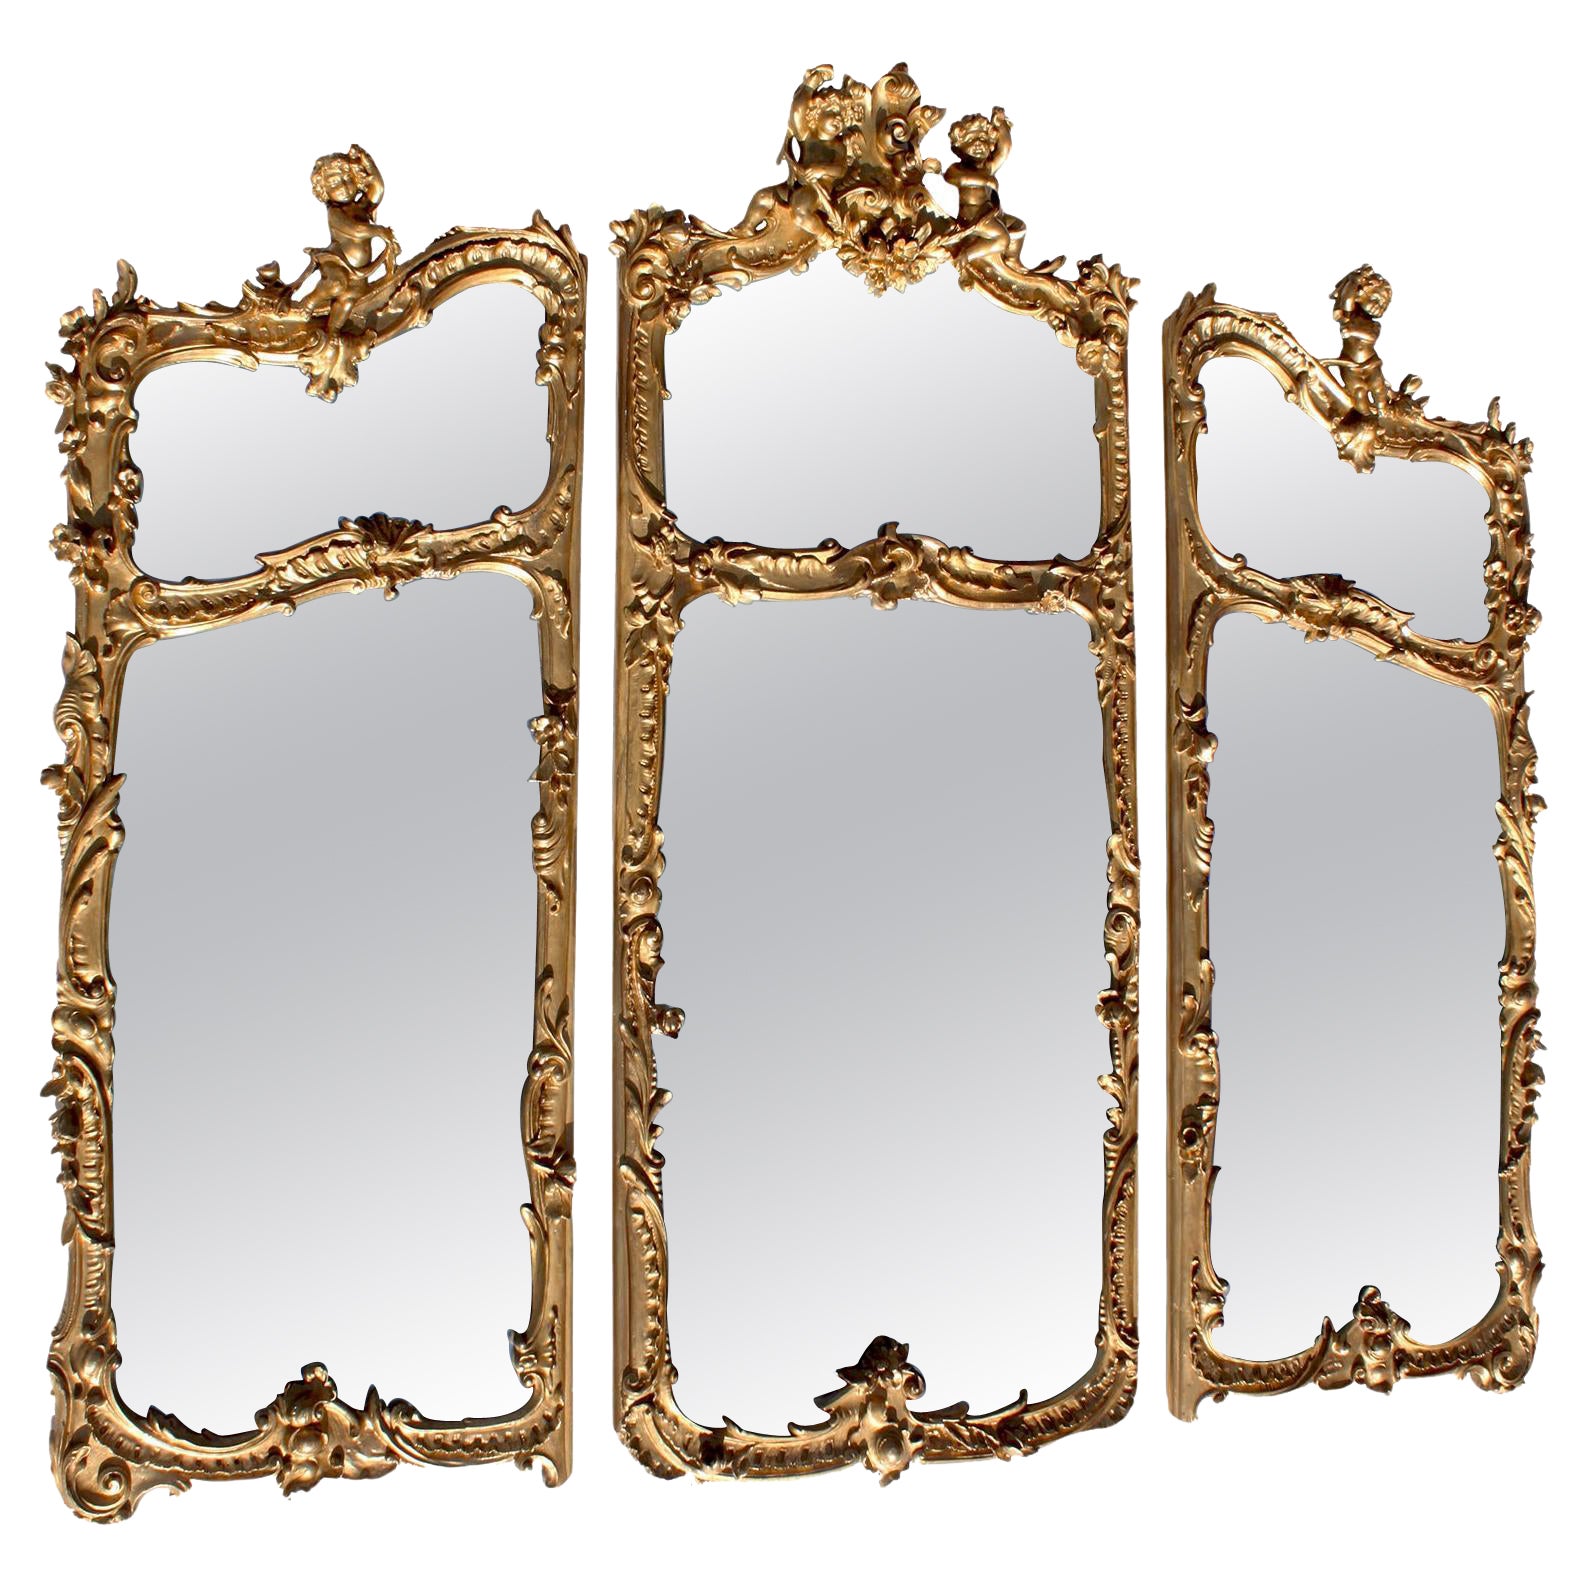 Whimsical French 19th-20th Century Belle Époque Gilt-Wood Triptych Putti Mirrors For Sale